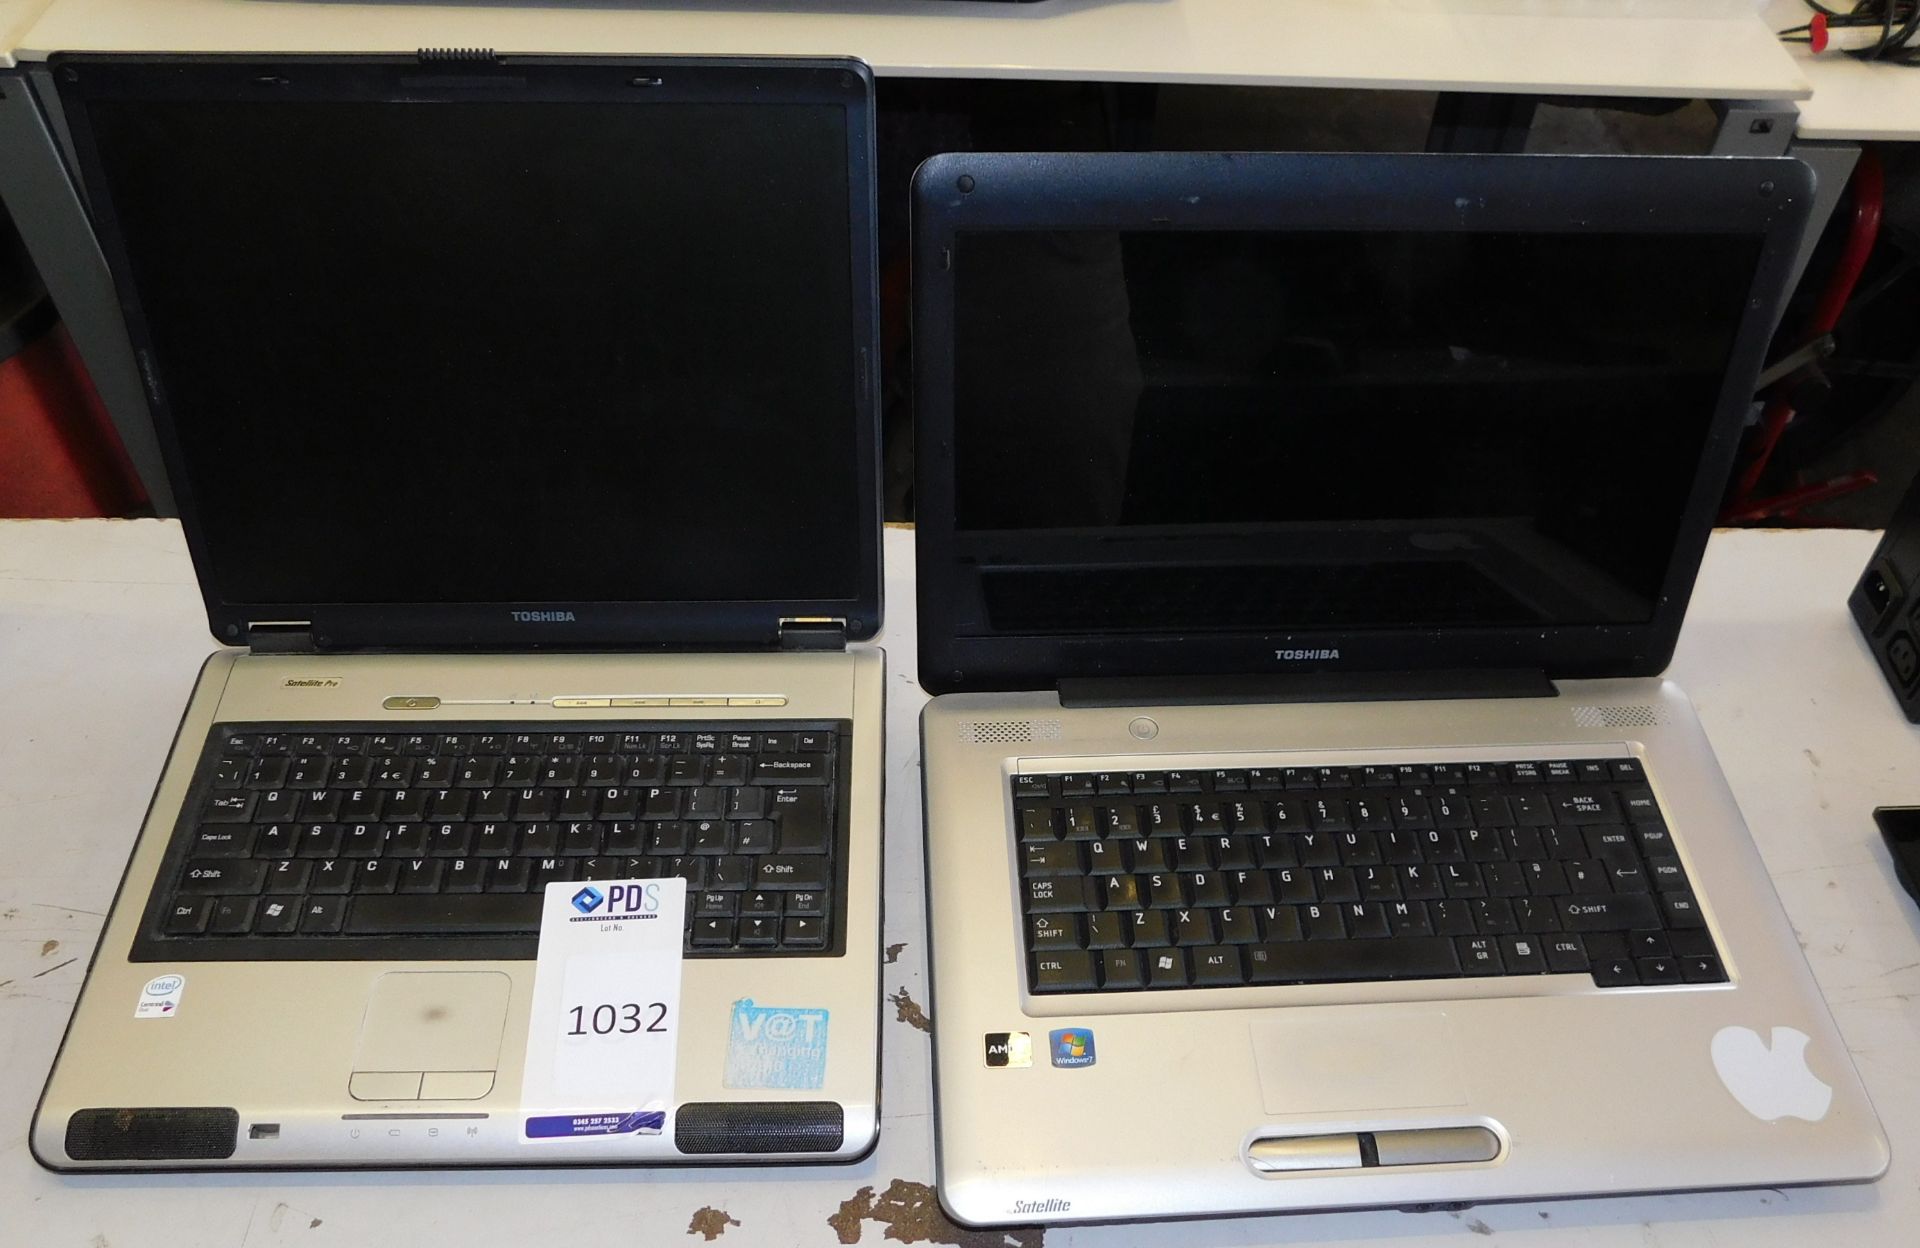 2 Toshiba Laptops (No PSU’s) (No HDDs) (One Damaged)  (Location Stockport. Please Refer to General